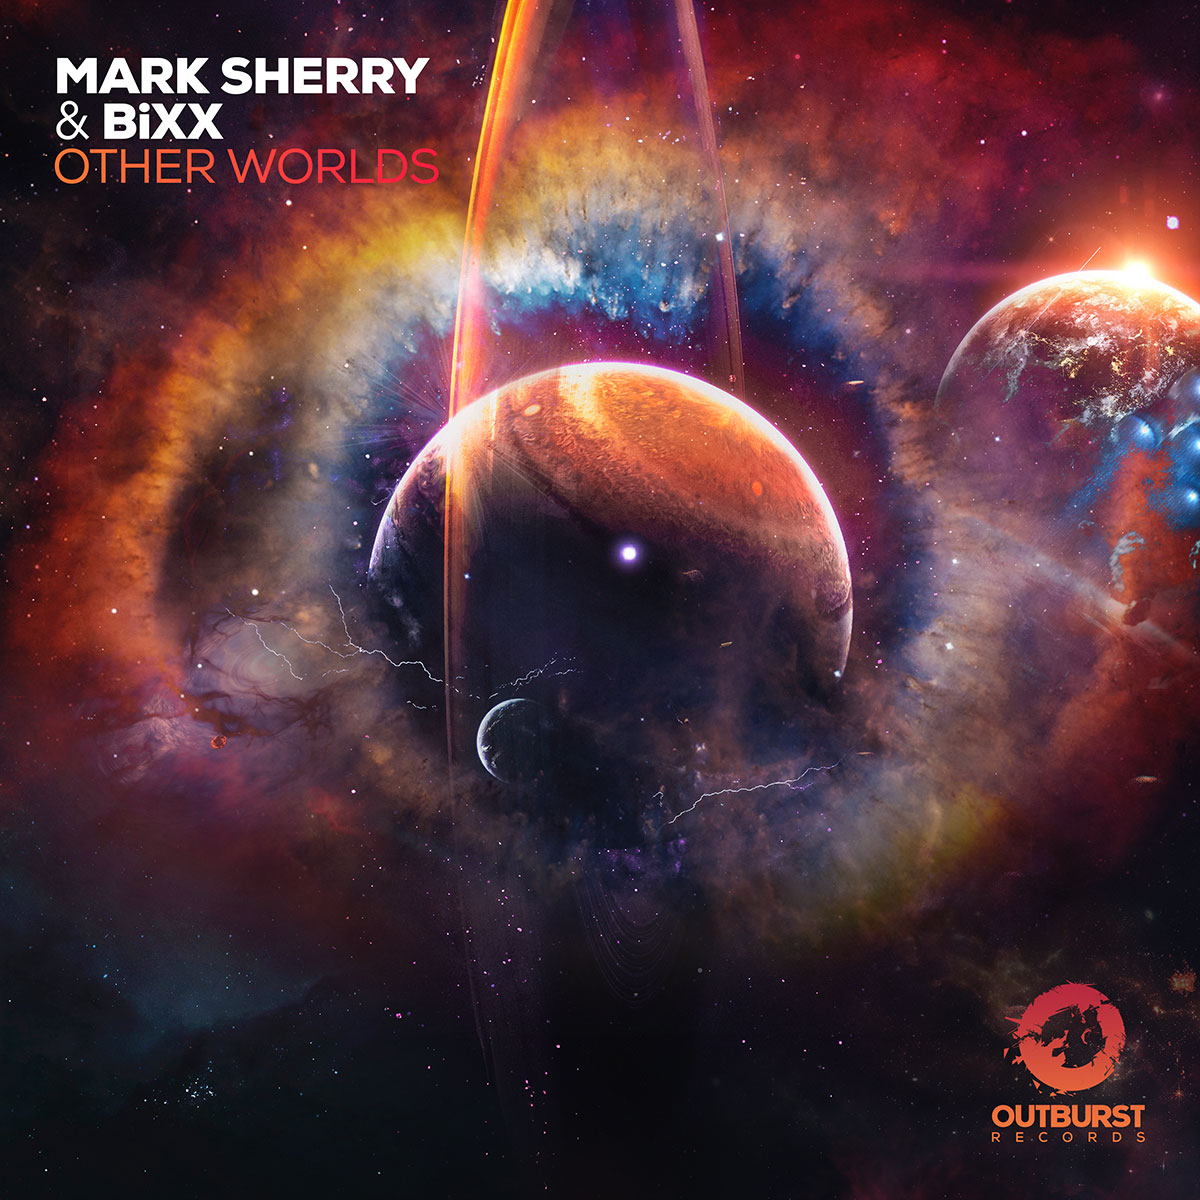 Scottish tech-trance connoisseur @marksherry teams up with American uplifting master @bixxaudio, to bring us this super-exciting collaboration! Absolutely hair-rising and crazy siren-lead build-up enters the fray – combined with an equally insane drop! Release date: 26.04.24